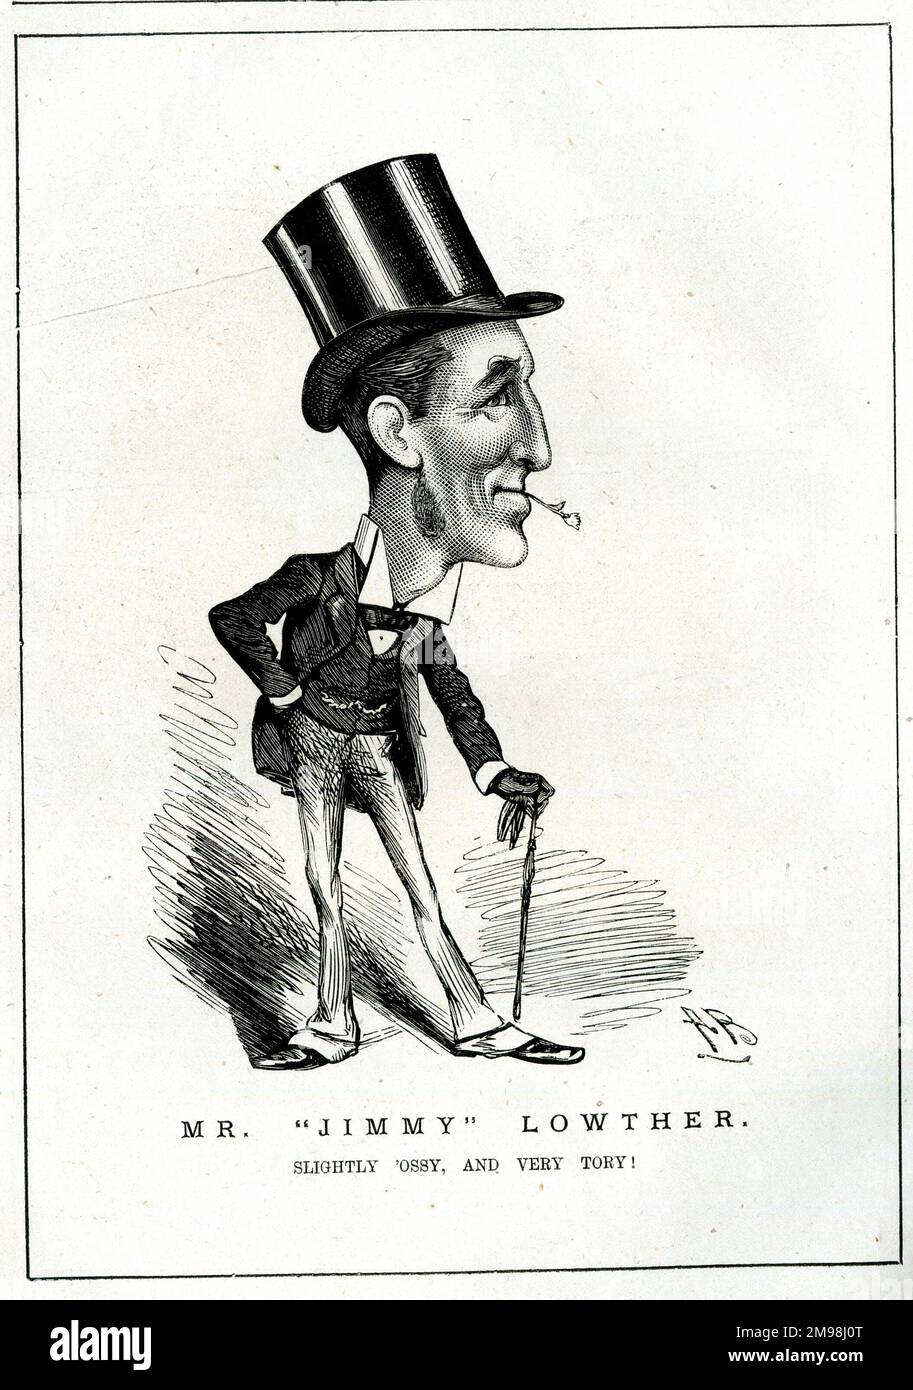 Cartoon, James (Jimmy) Lowther (1840-1904), Conservative politician and sportsman -- Slightly 'ossy [horsey], and very Tory! Stock Photo